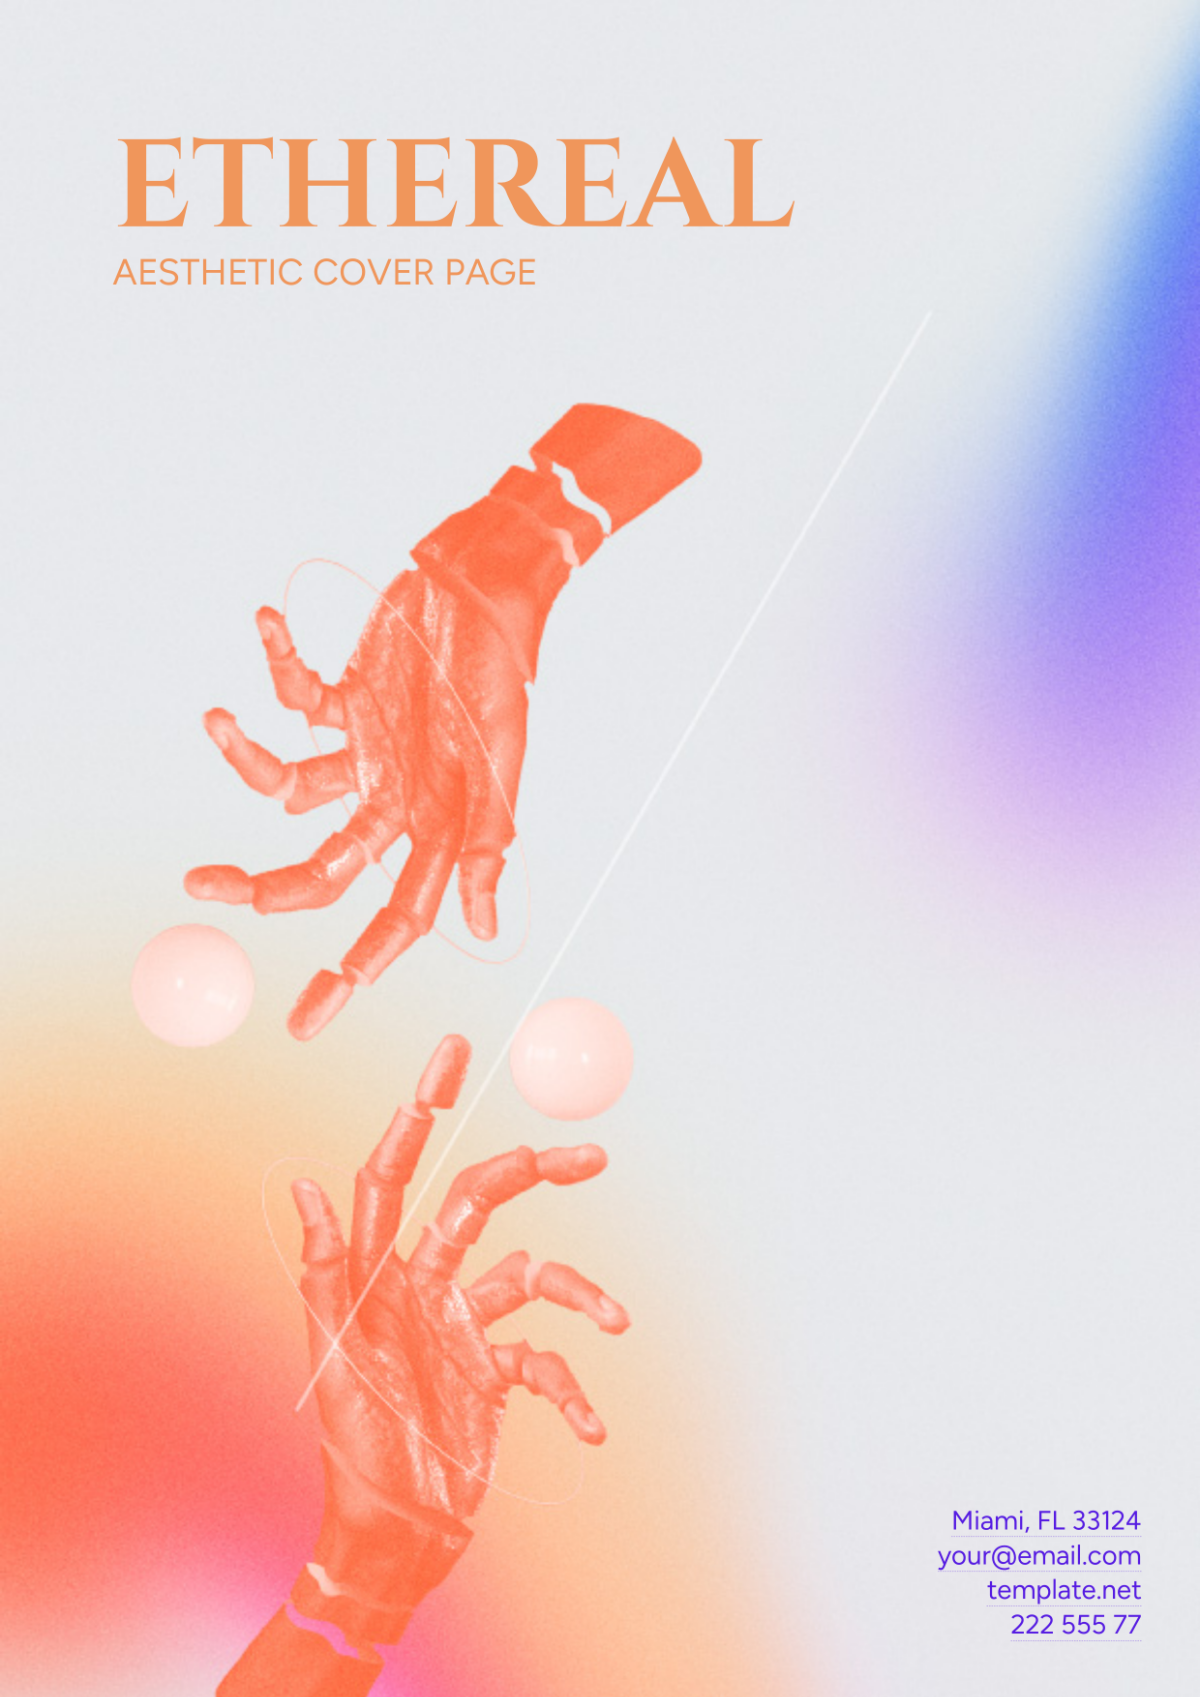 Ethereal Aesthetic Cover Page Template